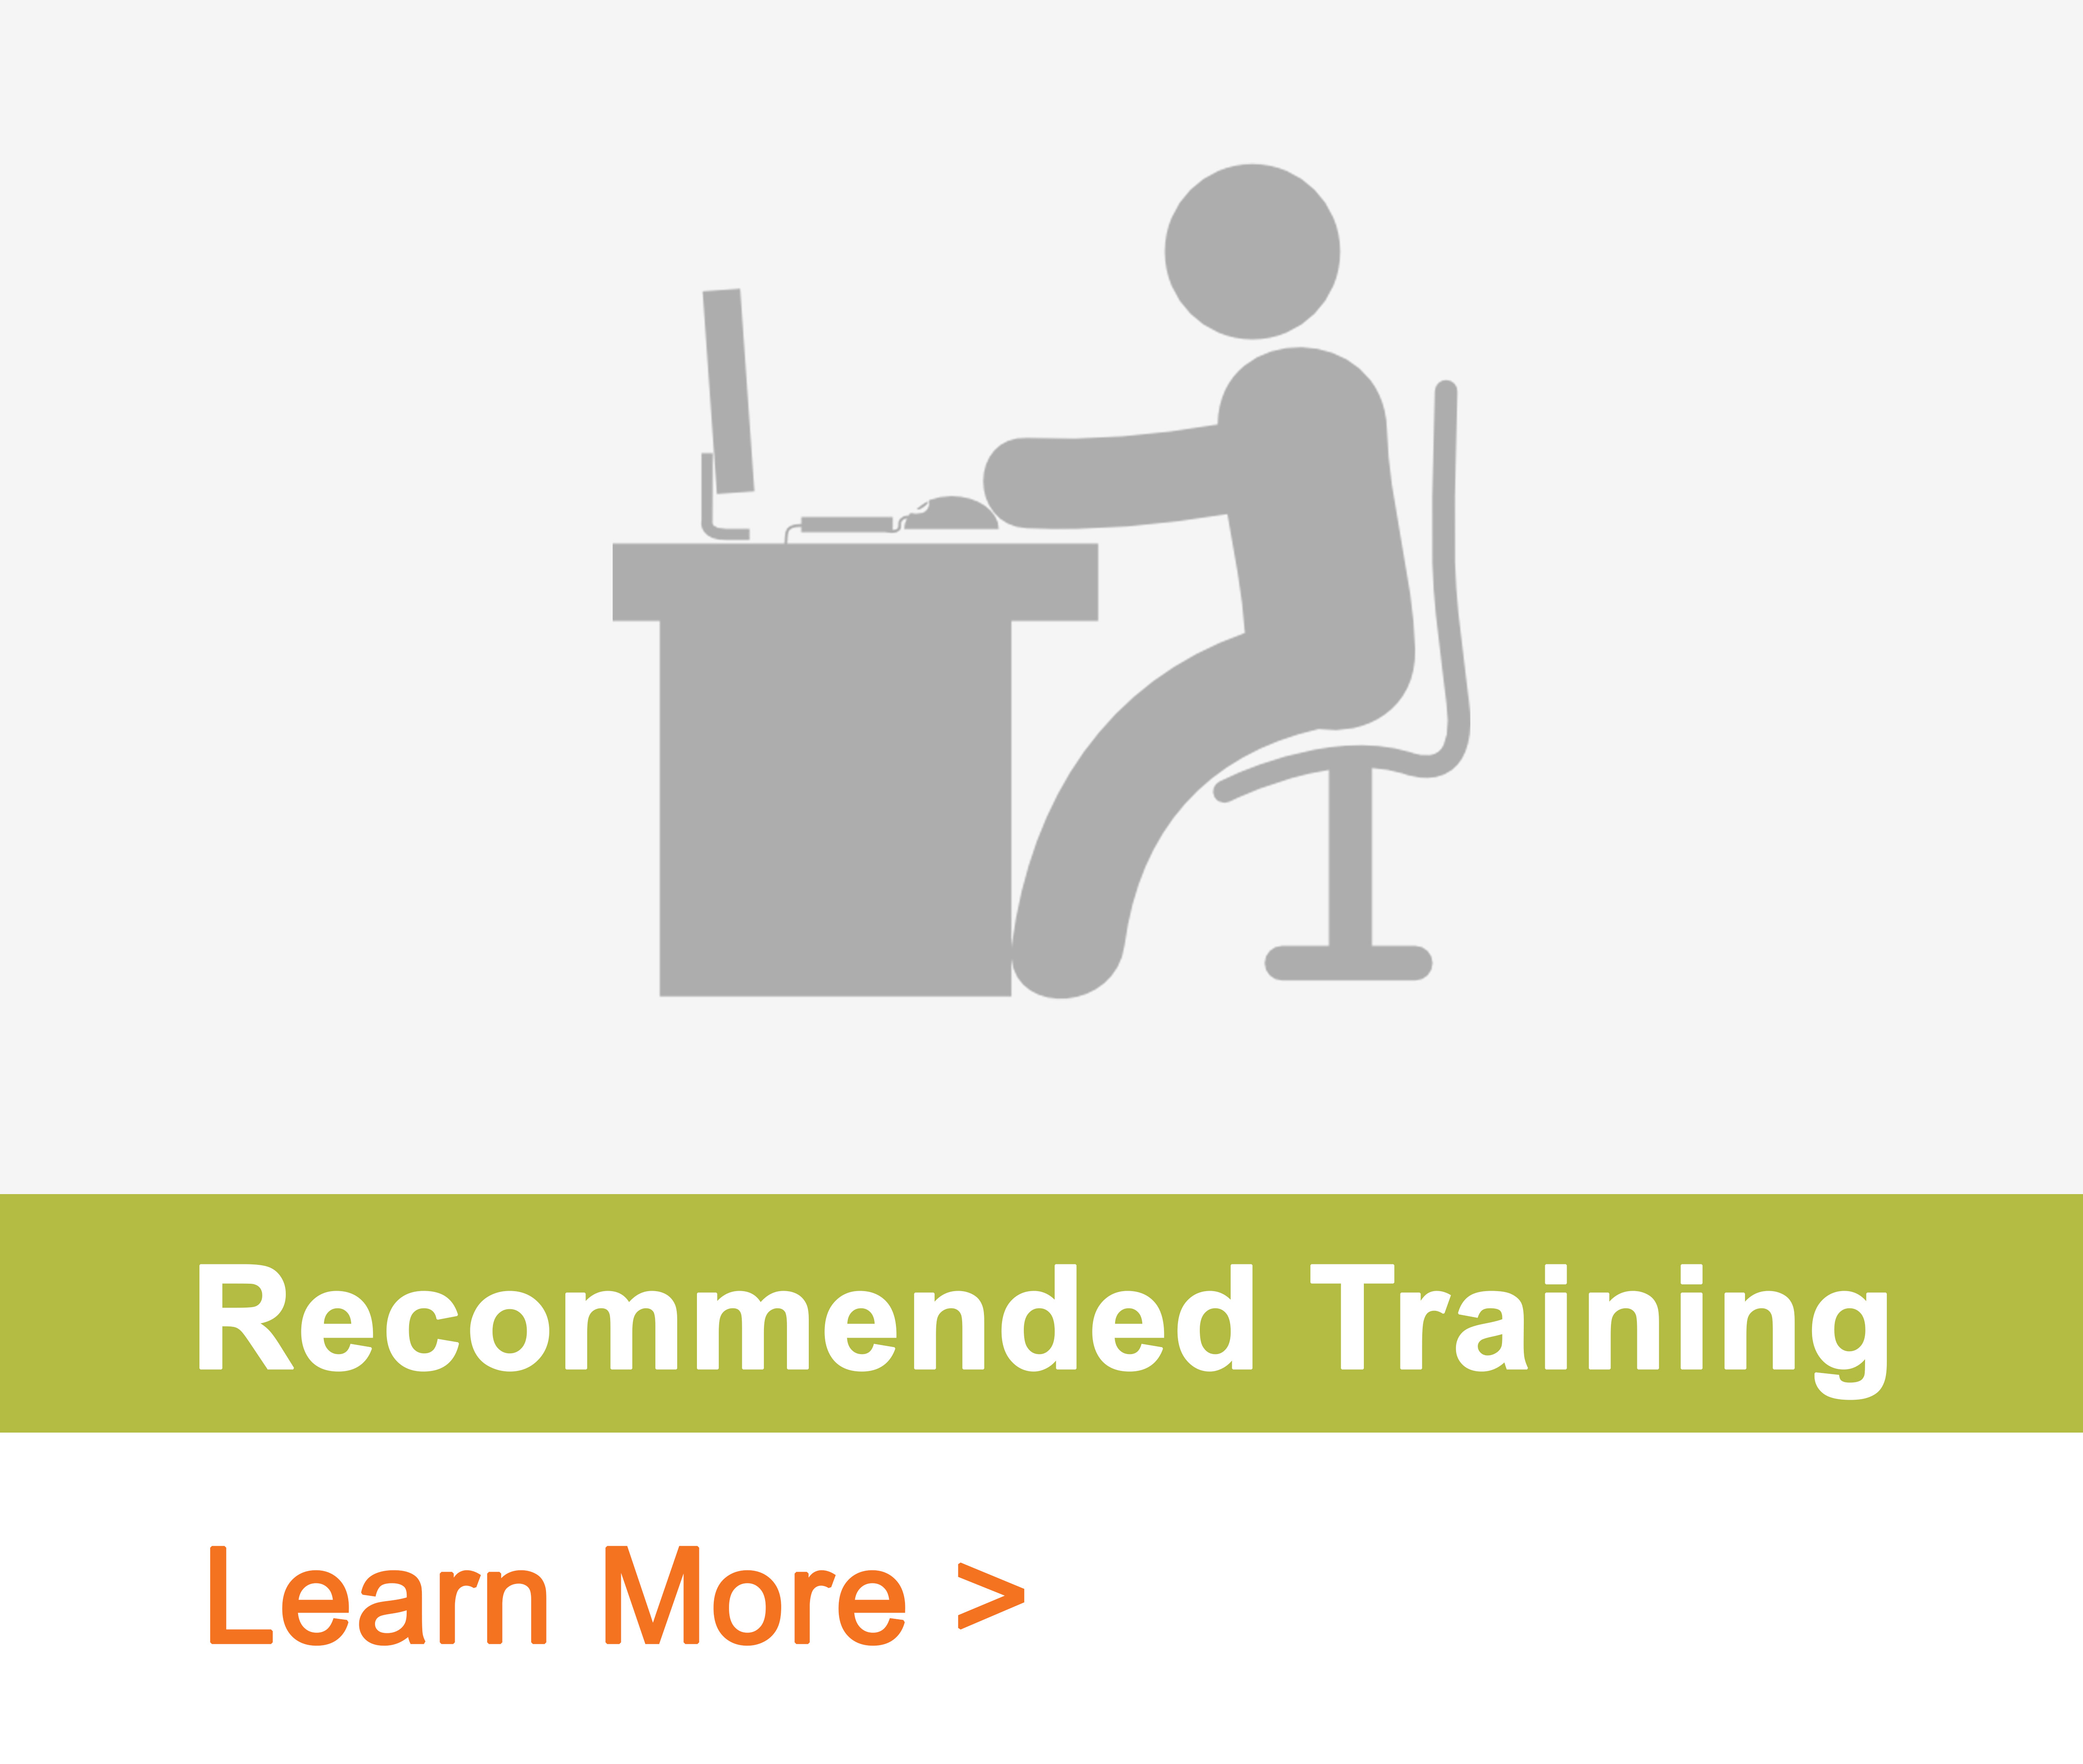 Recommended Training